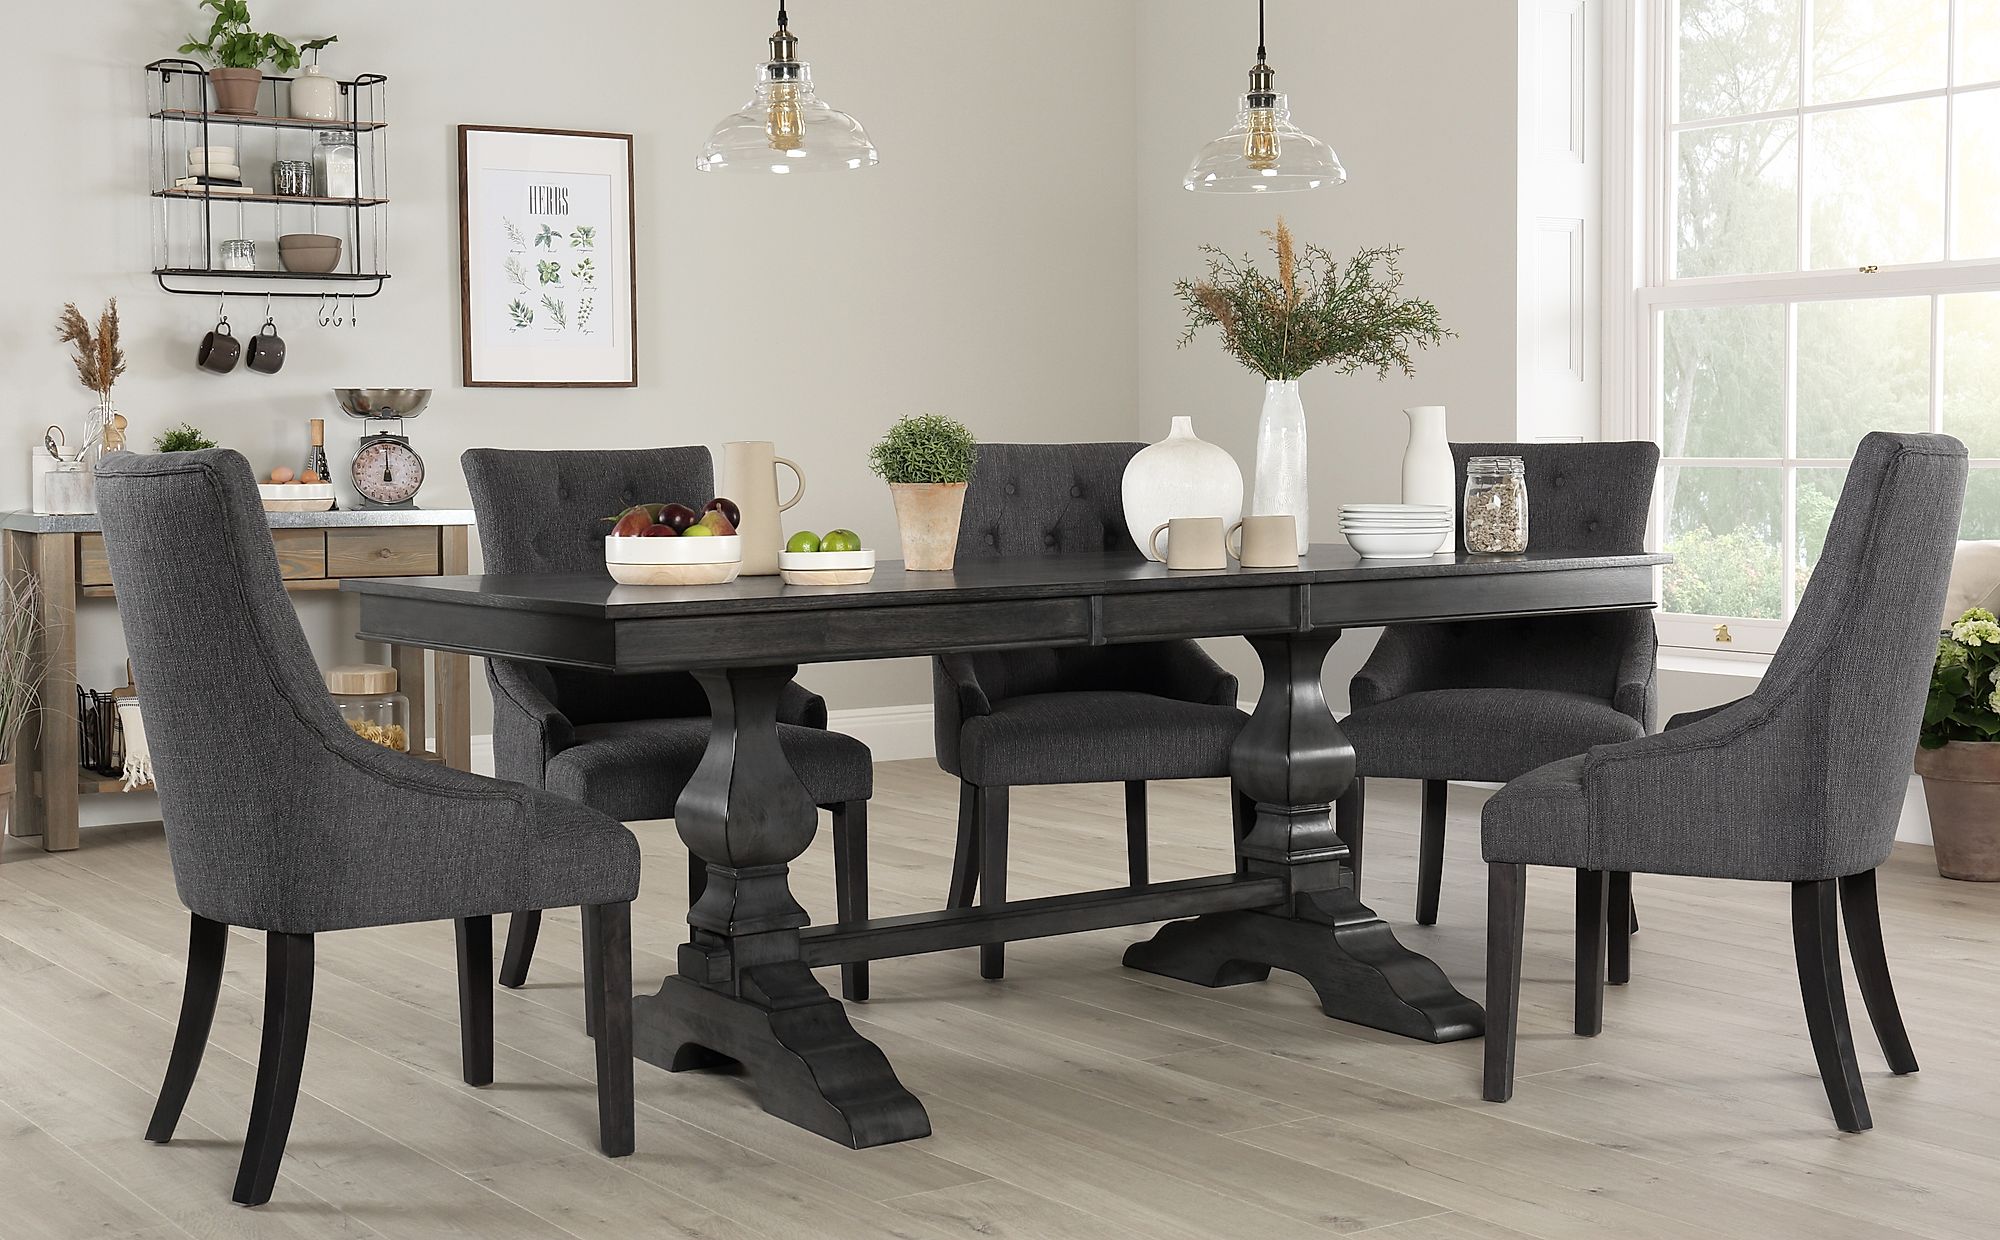 Grey Dining Room Table With Bench